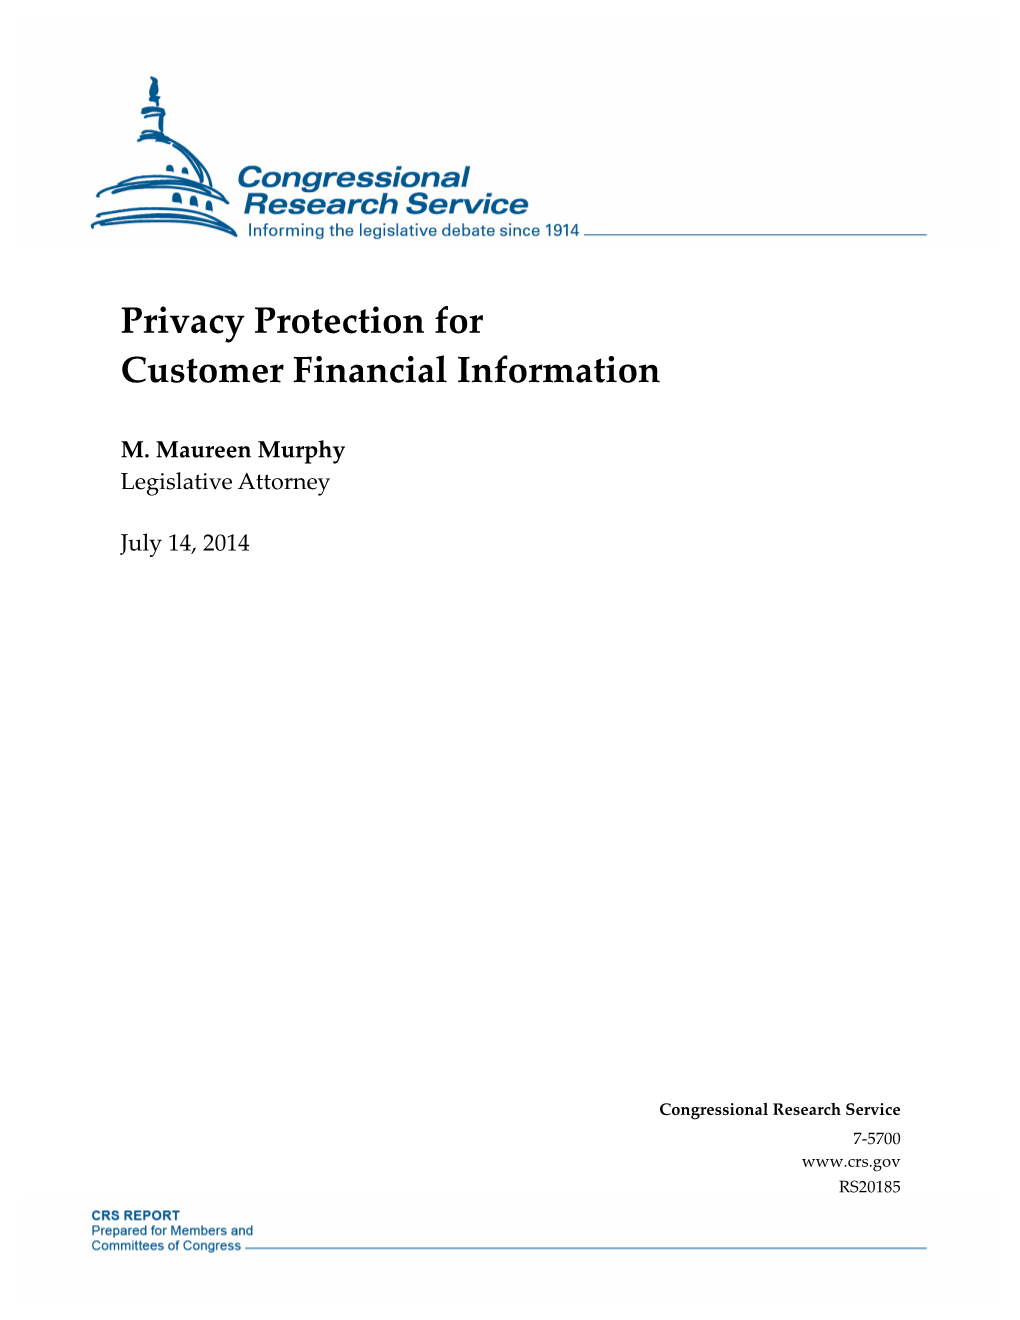 Privacy Protection for Customer Financial Information